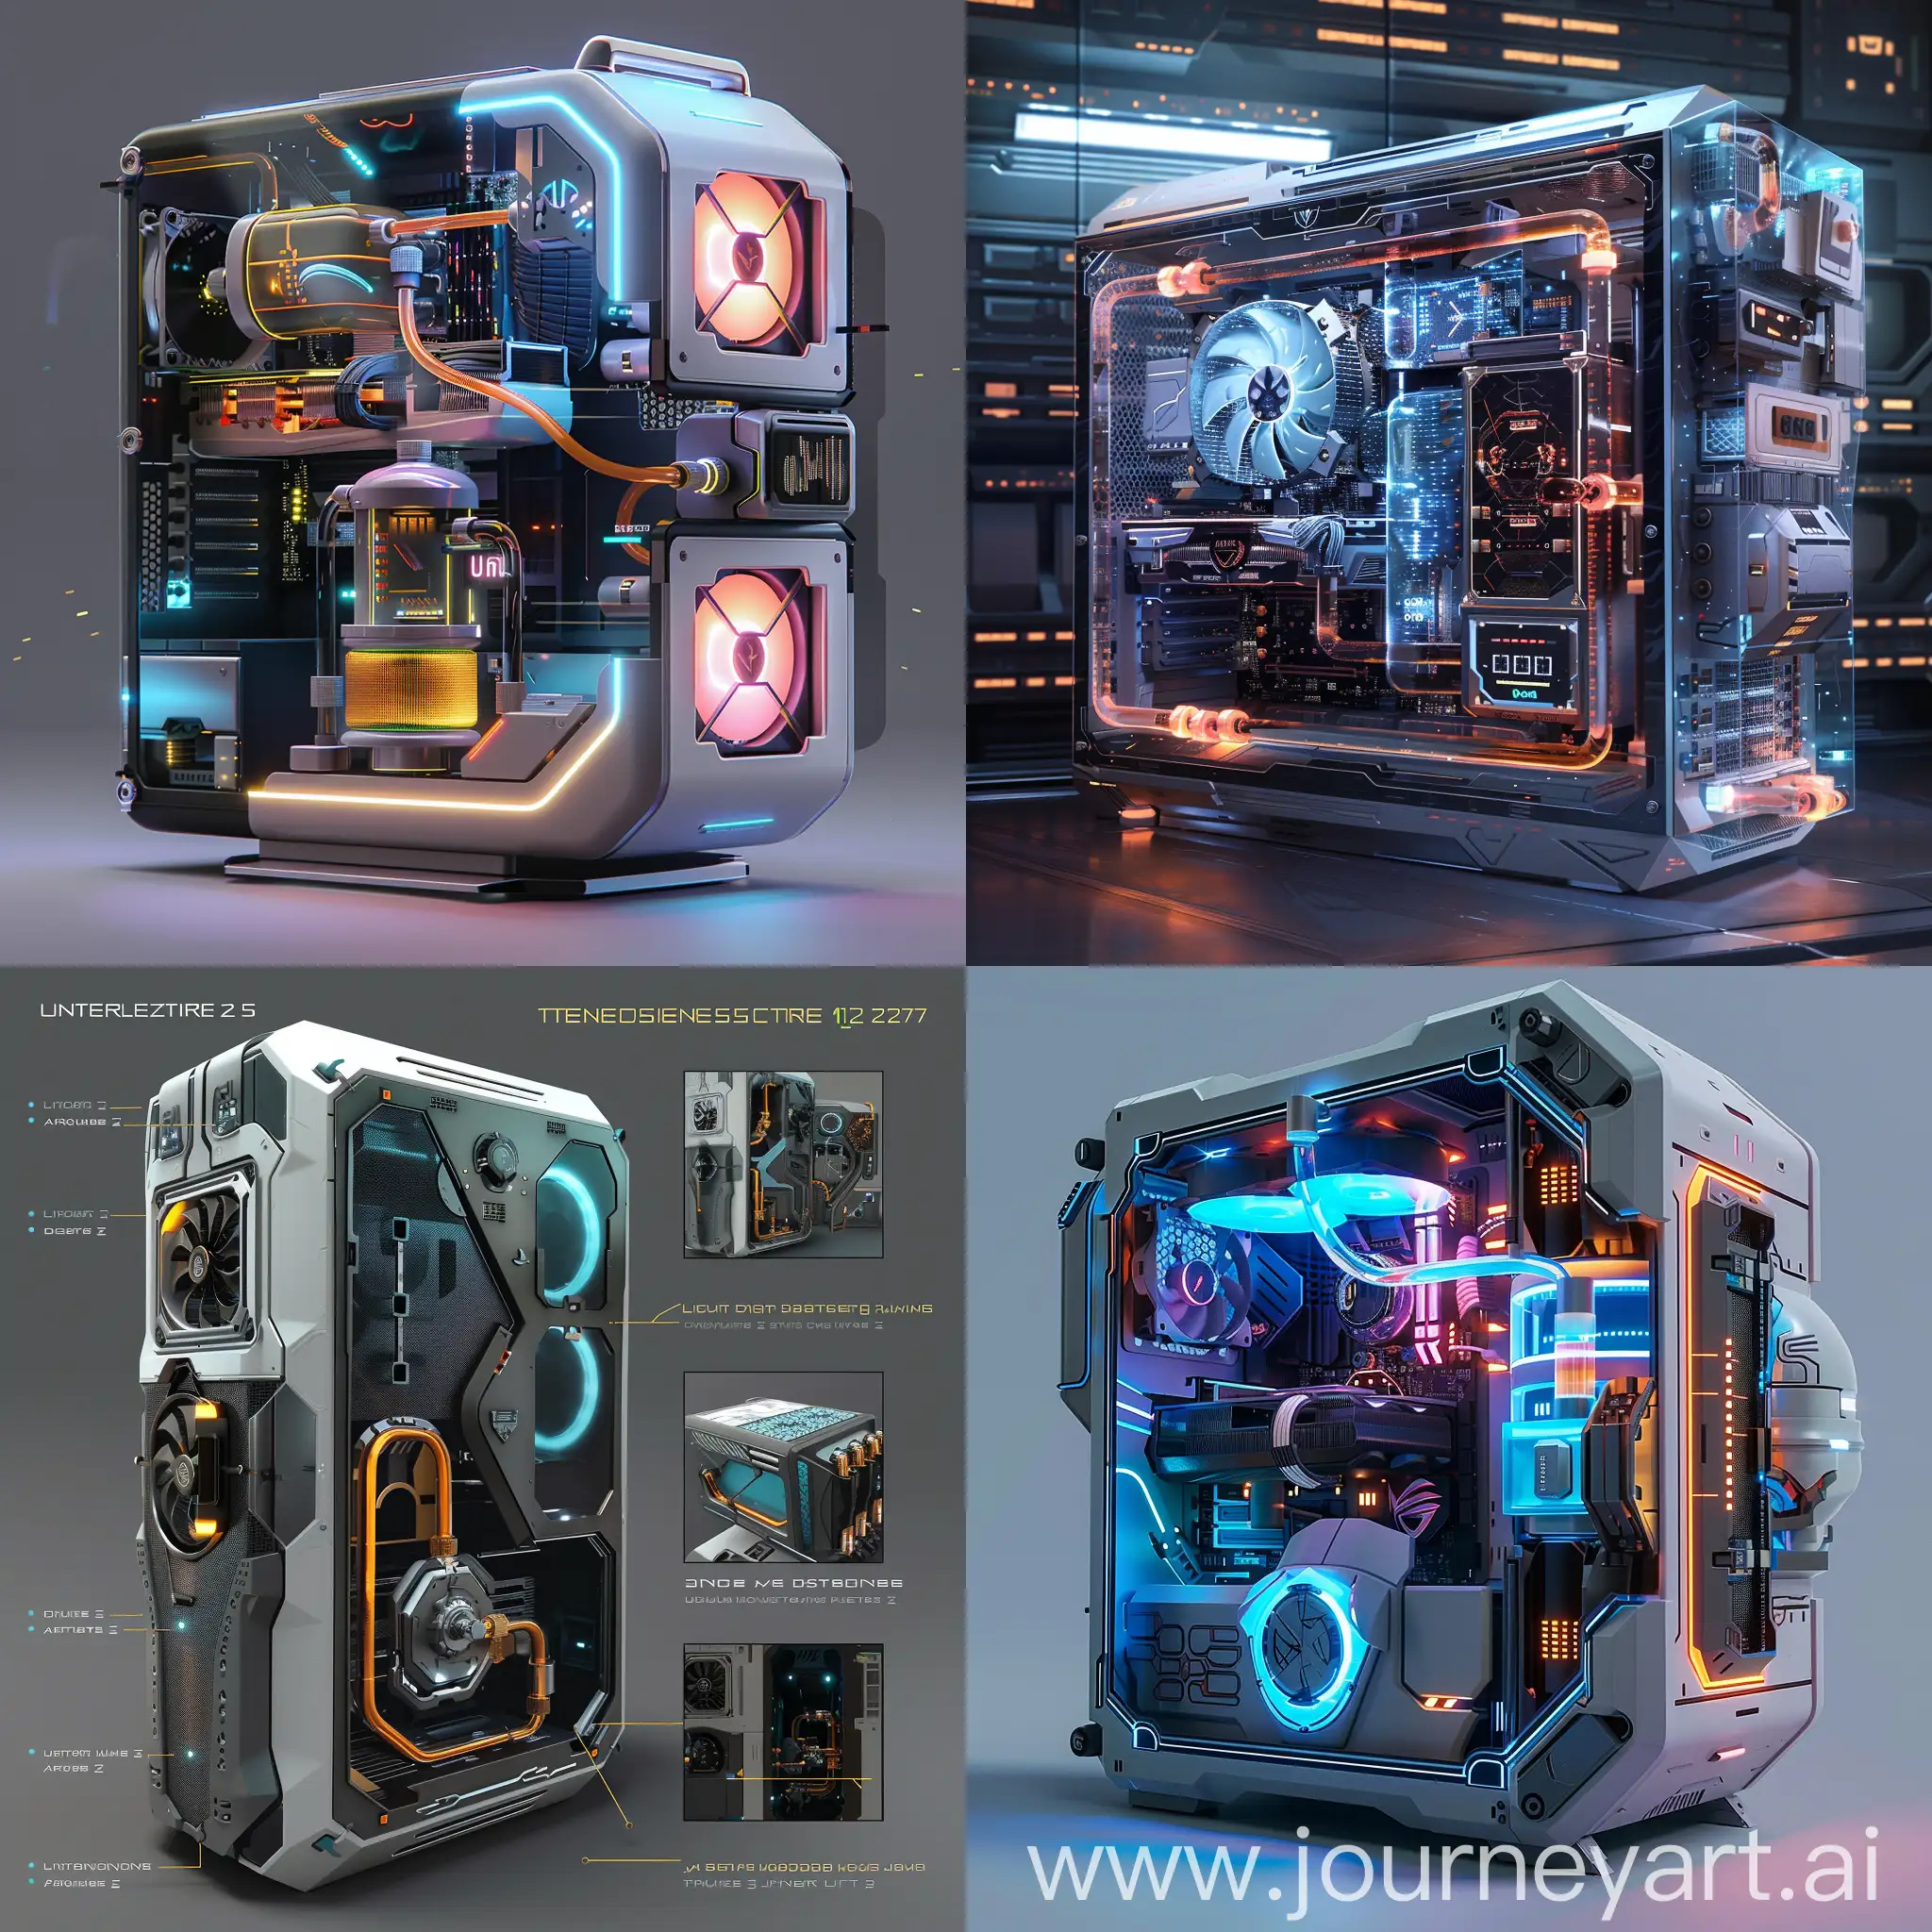 Futuristic-Modular-PC-Case-with-Organic-Shapes-and-Liquid-Cooling-Network